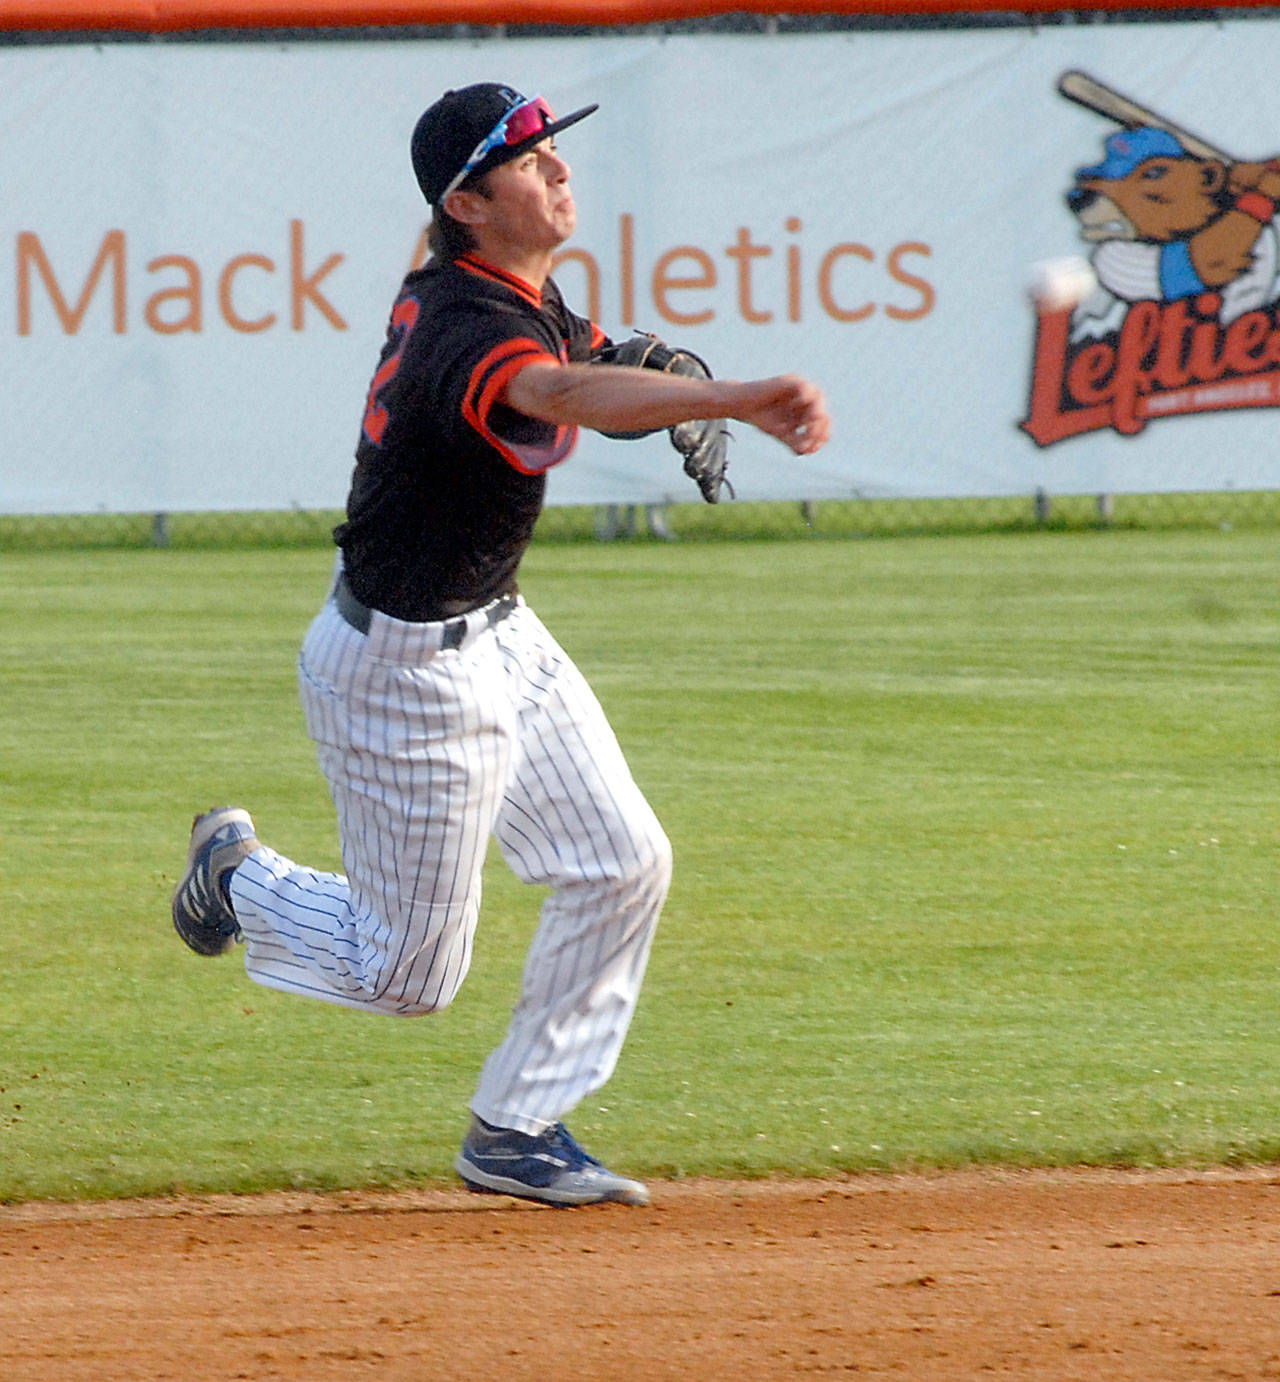 Port Angeles Lefties shortstop Nick Oakley makes a throw to first on during a game at Civic Field in Port Angeles. (Keith Thorpe/Peninsula Daily News)